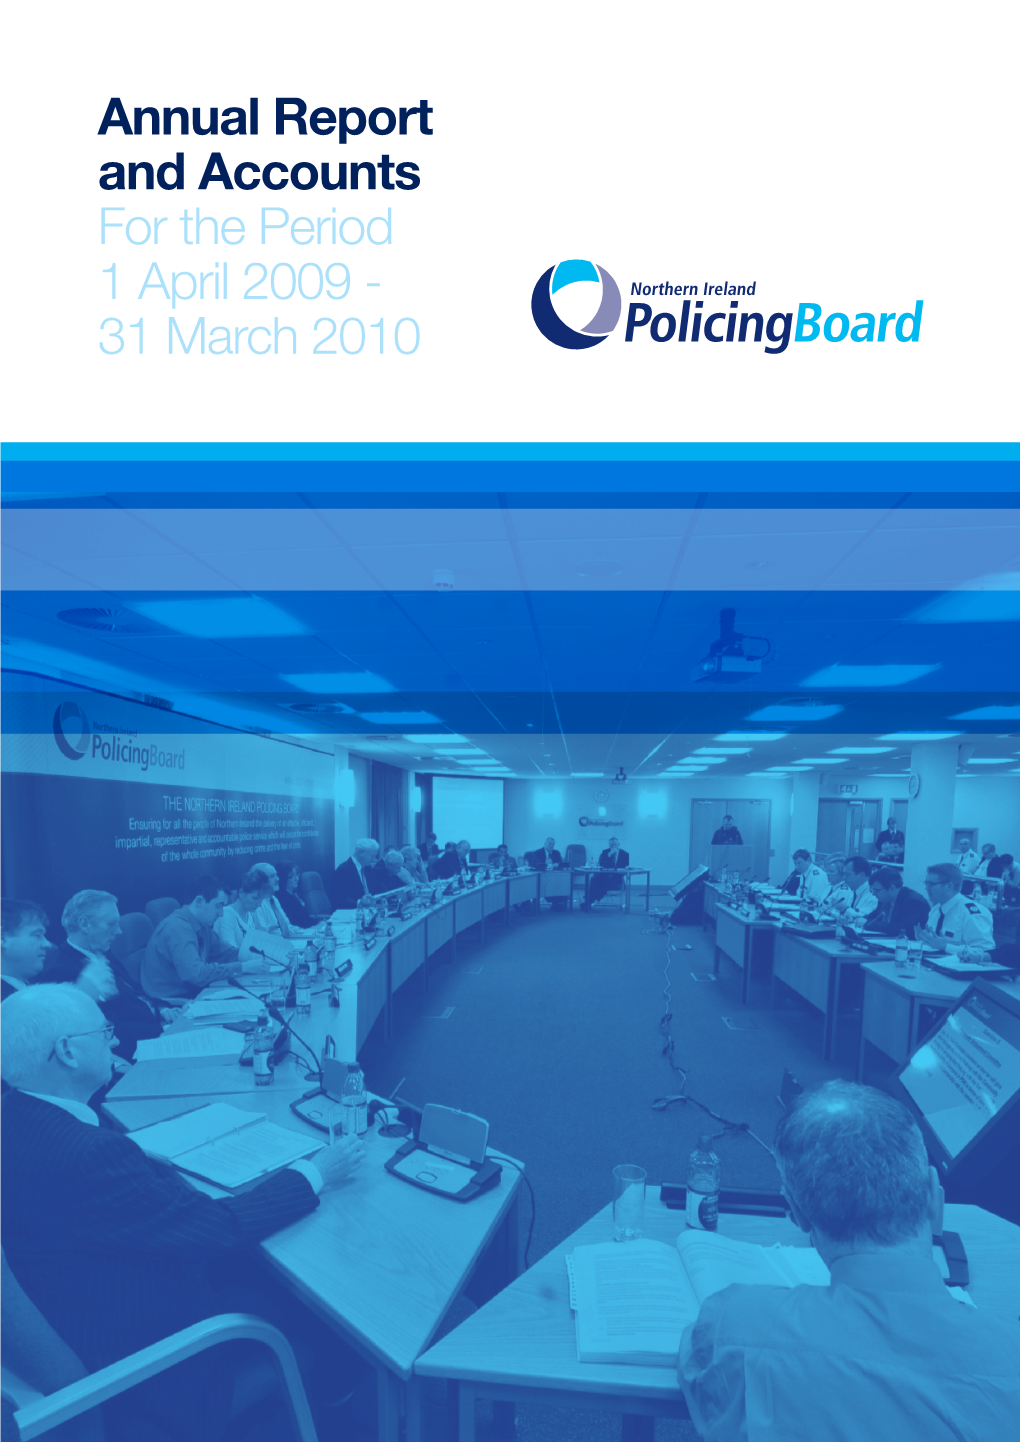 Northern Ireland Policing Board Annual Report and Accounts for the Period 1 April 2009 - 31 March 2010